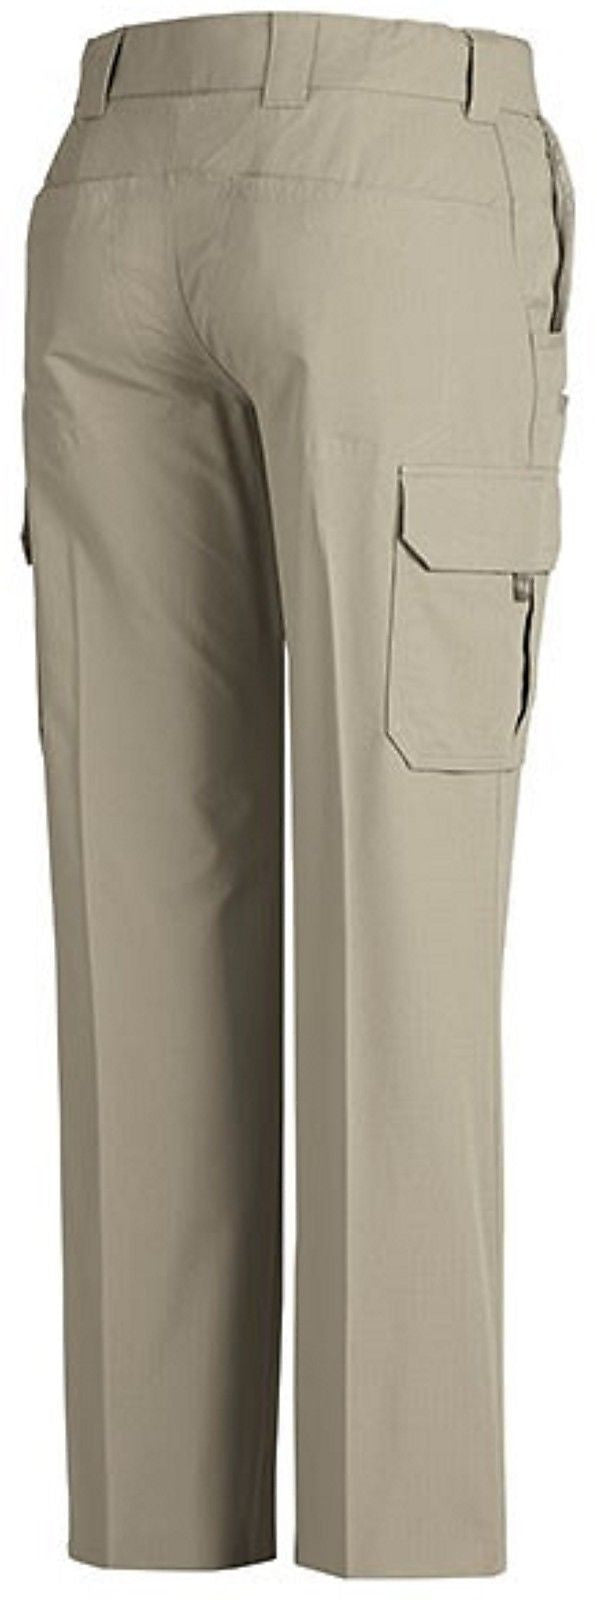 Women's Ripstop Stretch Unhemmed Tactical Pants - Relaxed Fit Field Du ...